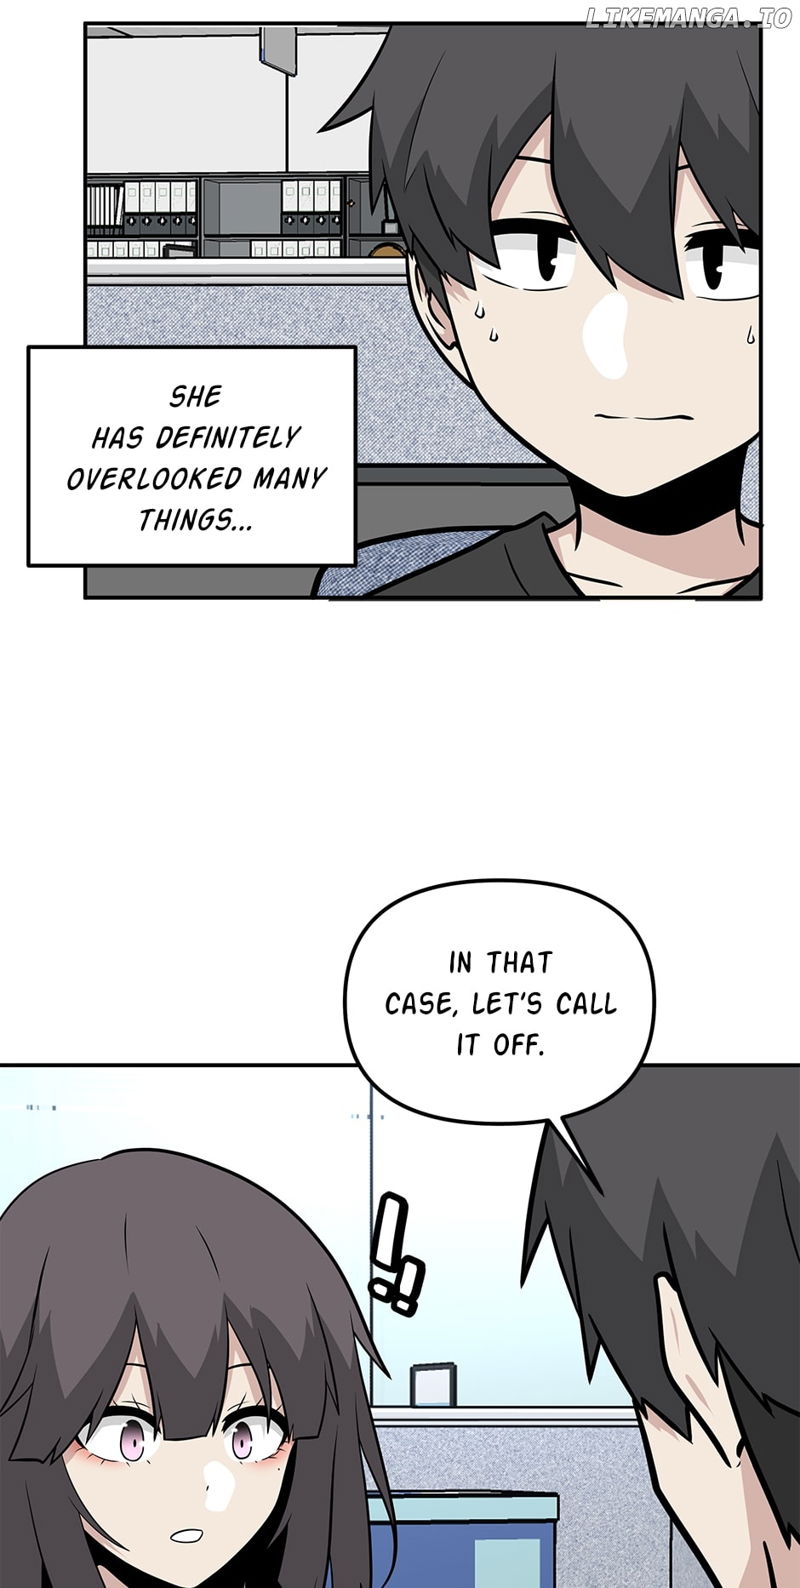 Where Are You Looking, Manager? Chapter 118 page 18